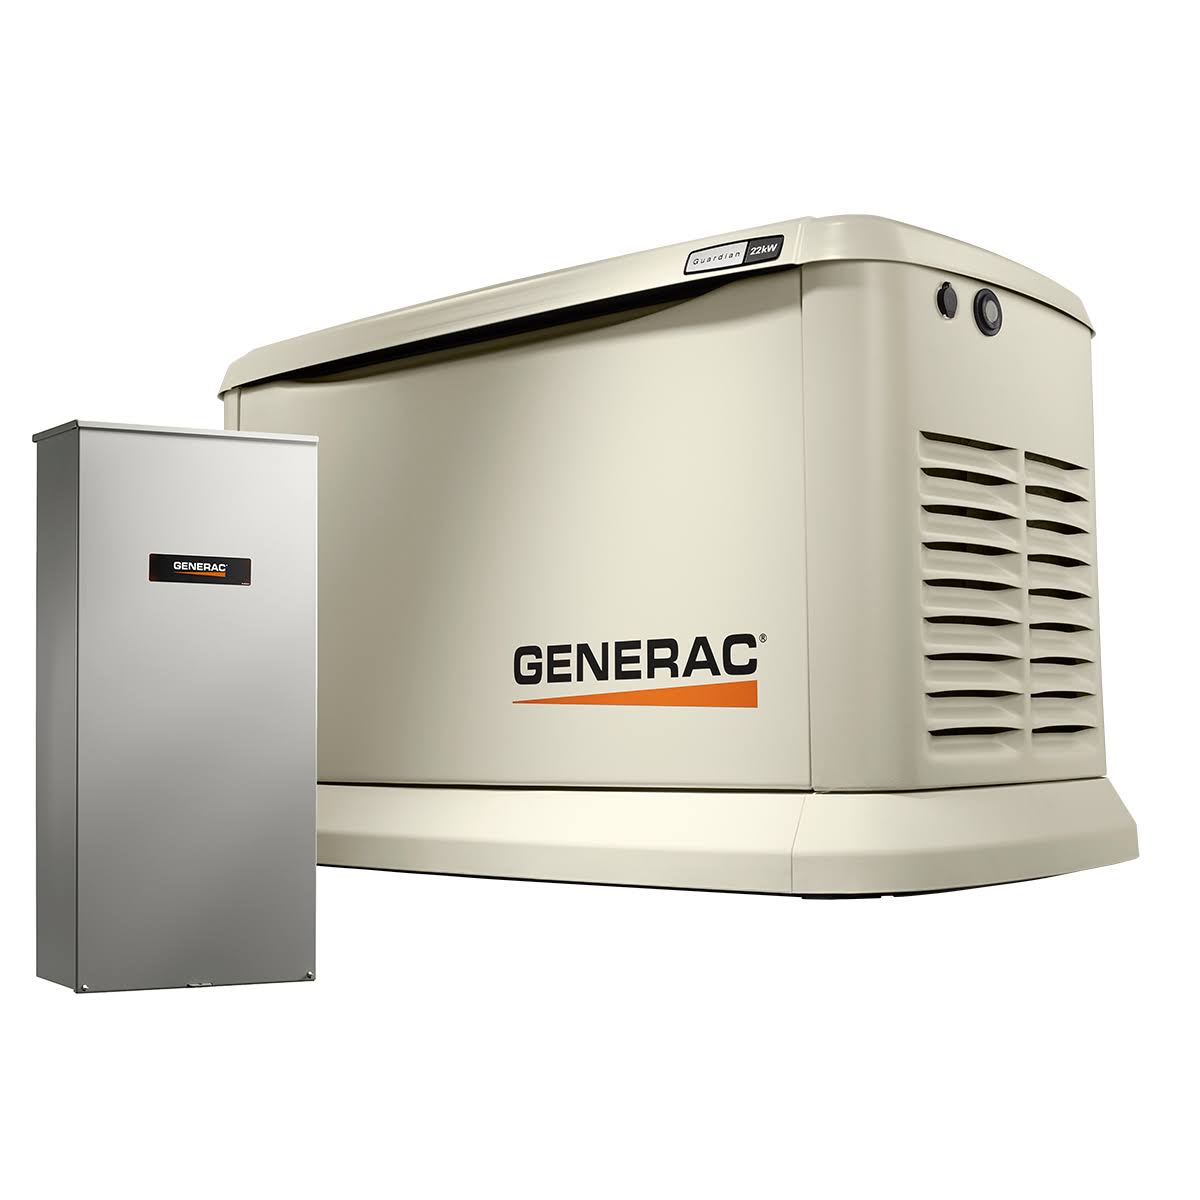 Generac Guardian Generac 7043 Guardian Series 22kW/19.5kW Air Cooled Home Standby Generator with Whole House 200 Amp Transfer Switch (not CUL)